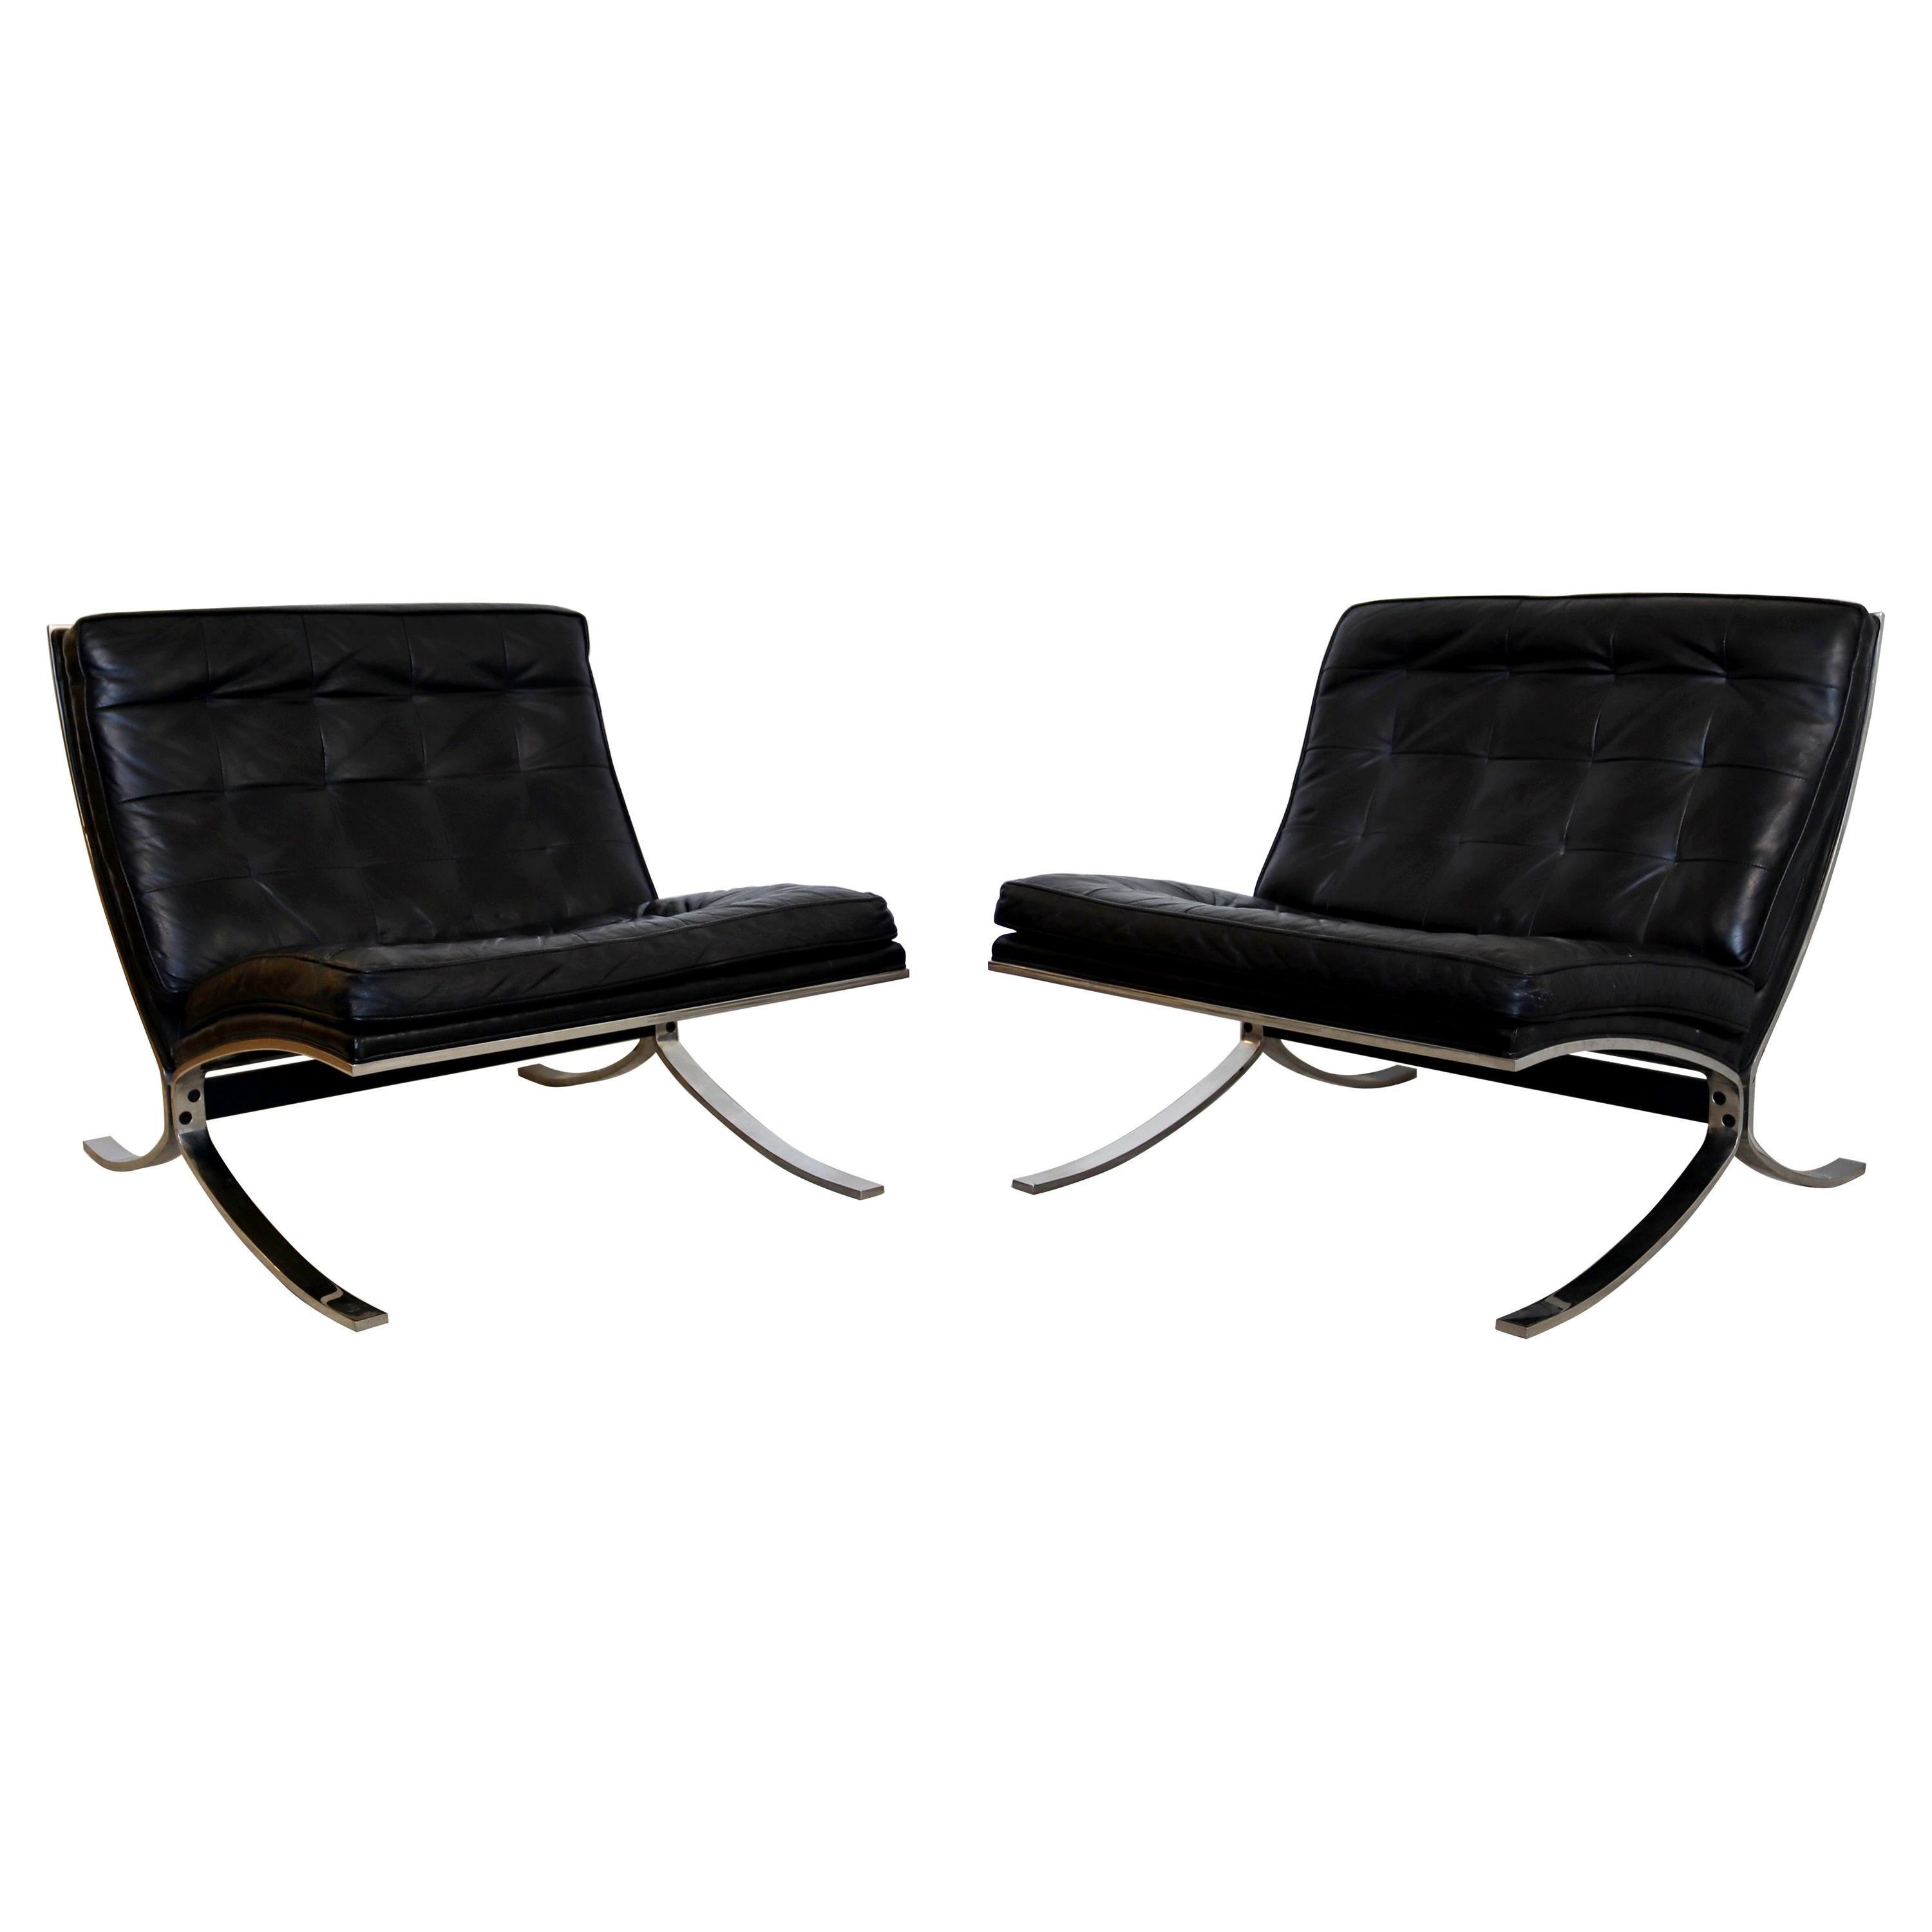 Mid-Century Modern Barcelona Pair of Lounge Chairs Mies Van der Rohe Style 1970s